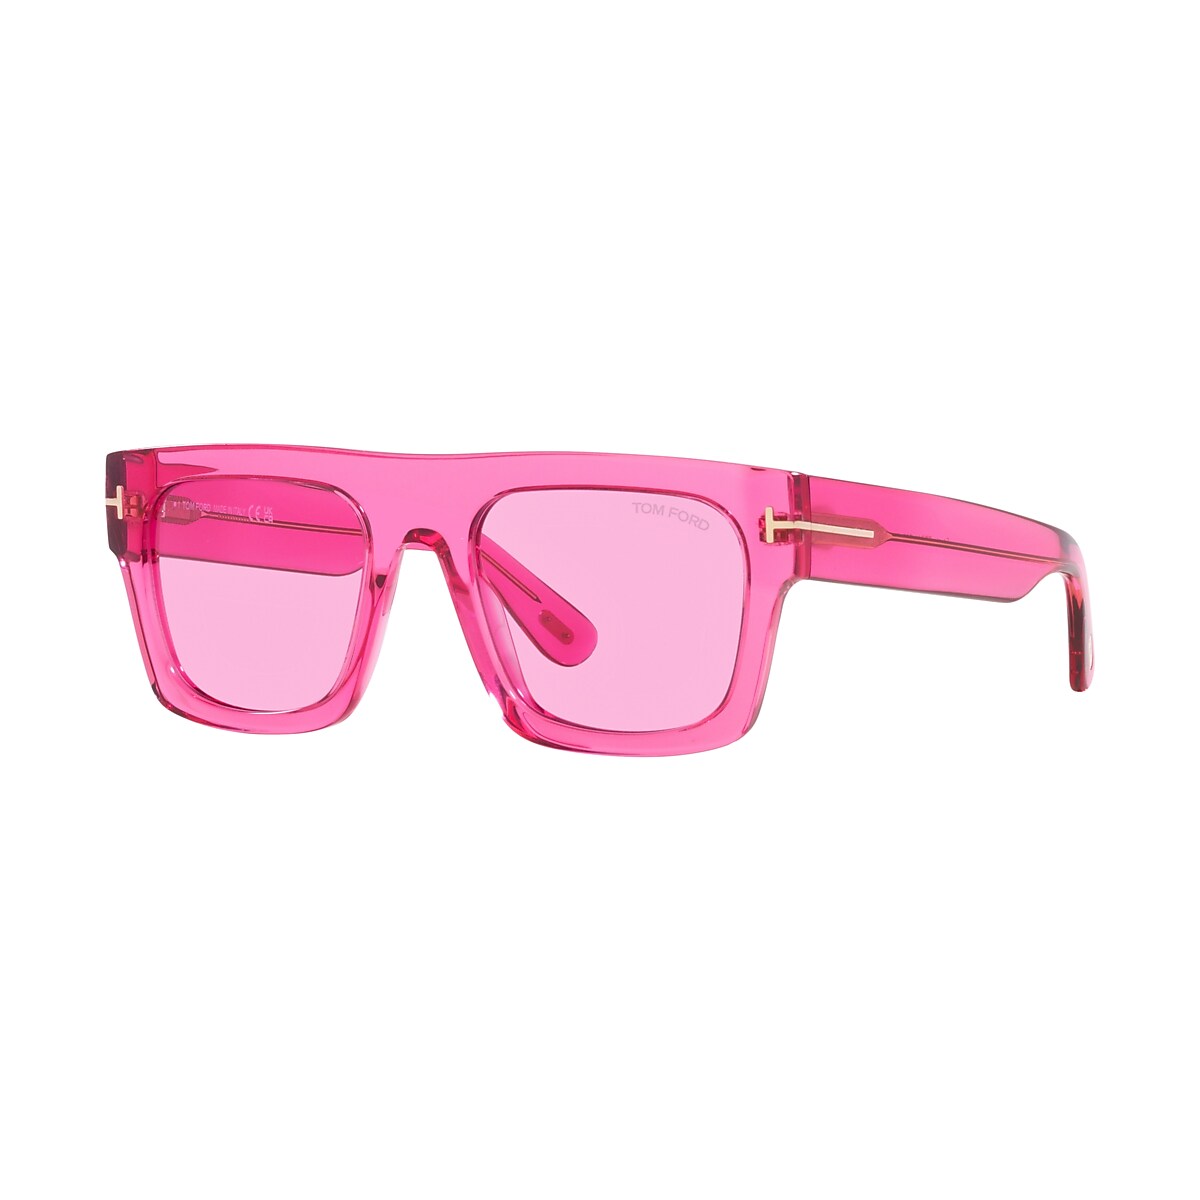 TOM FORD TR001029 Pink - Male Luxury Sunglasses, Pink Lens